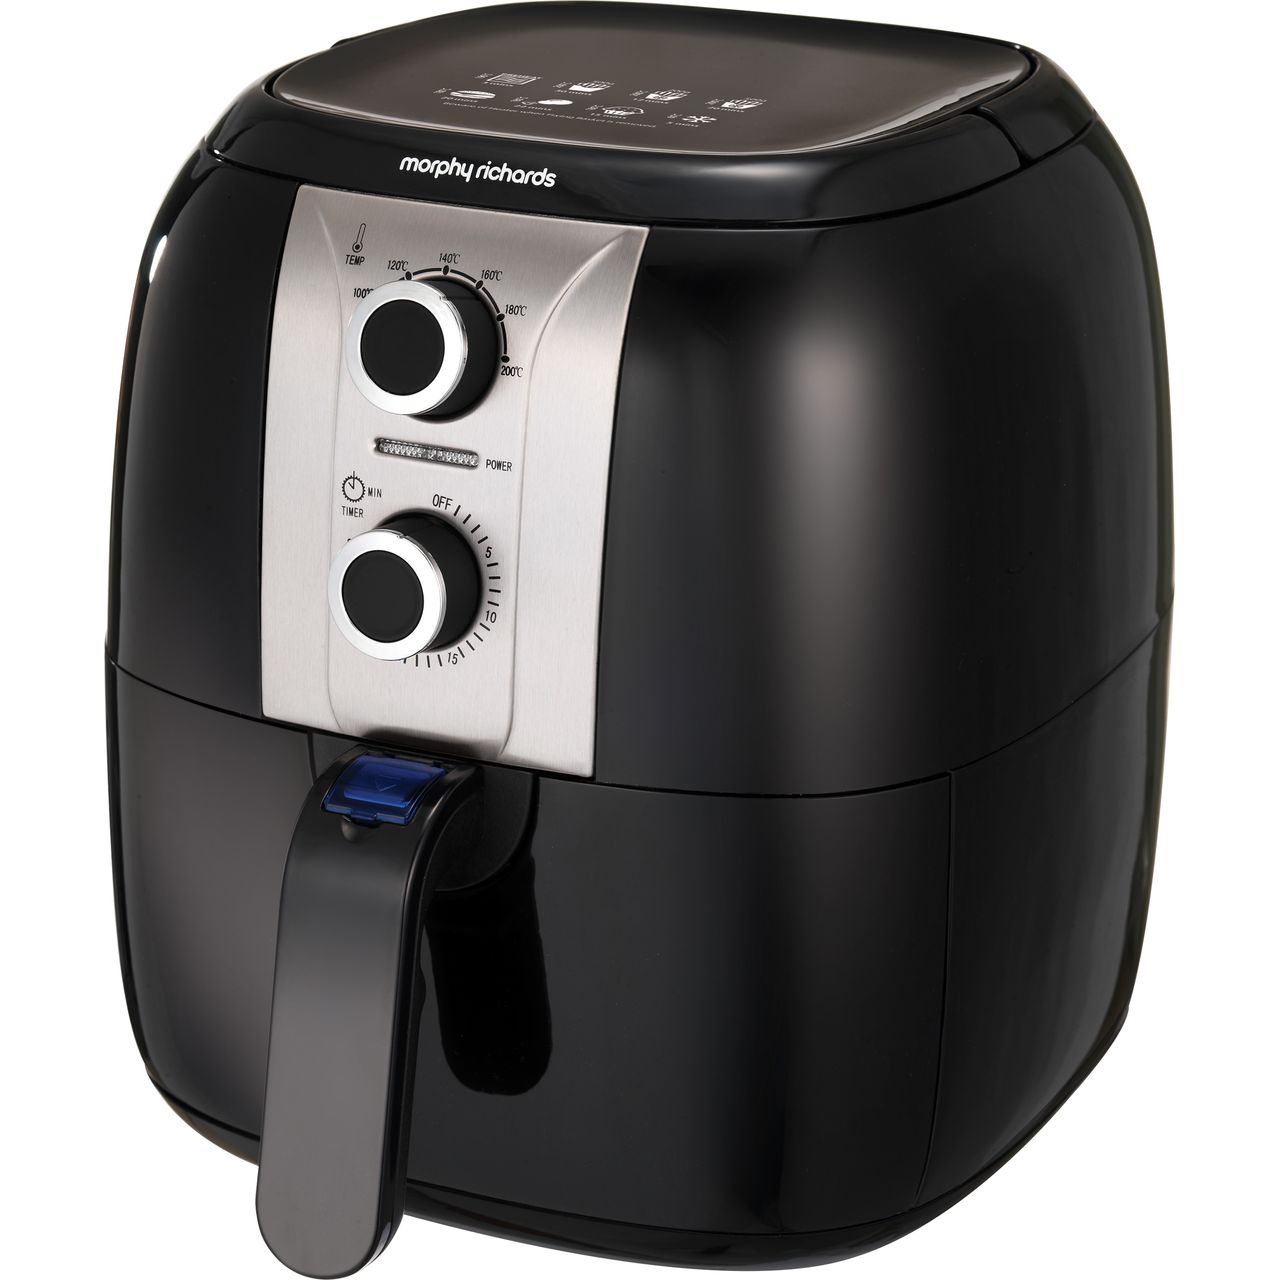 Morphy Richards 480003 Fryer Review